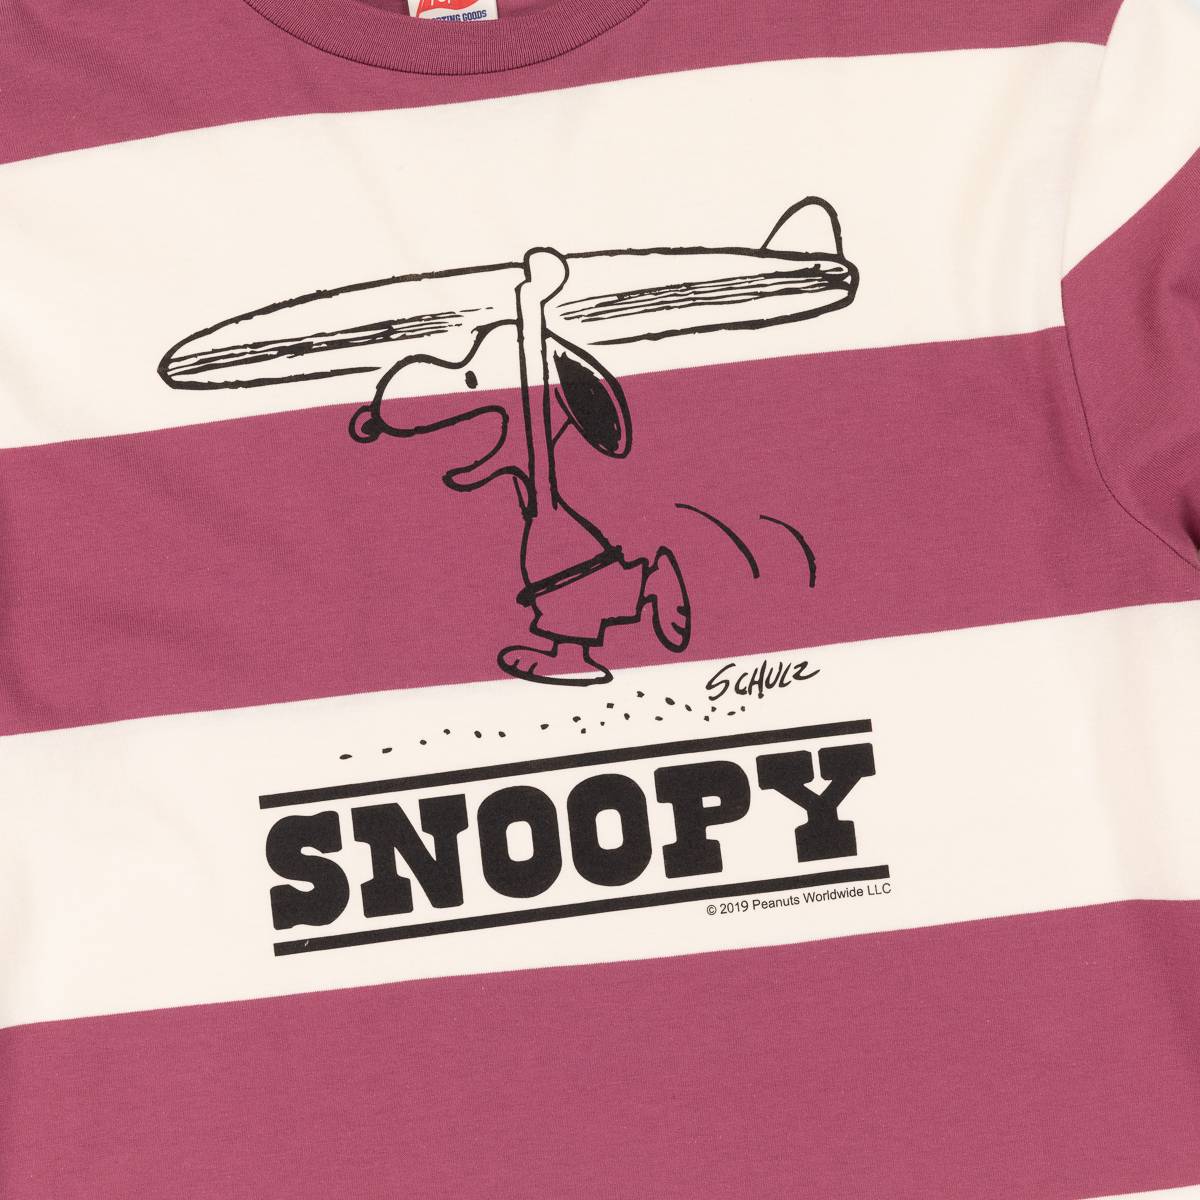 Snoopy Surf's Up LS Border Tee